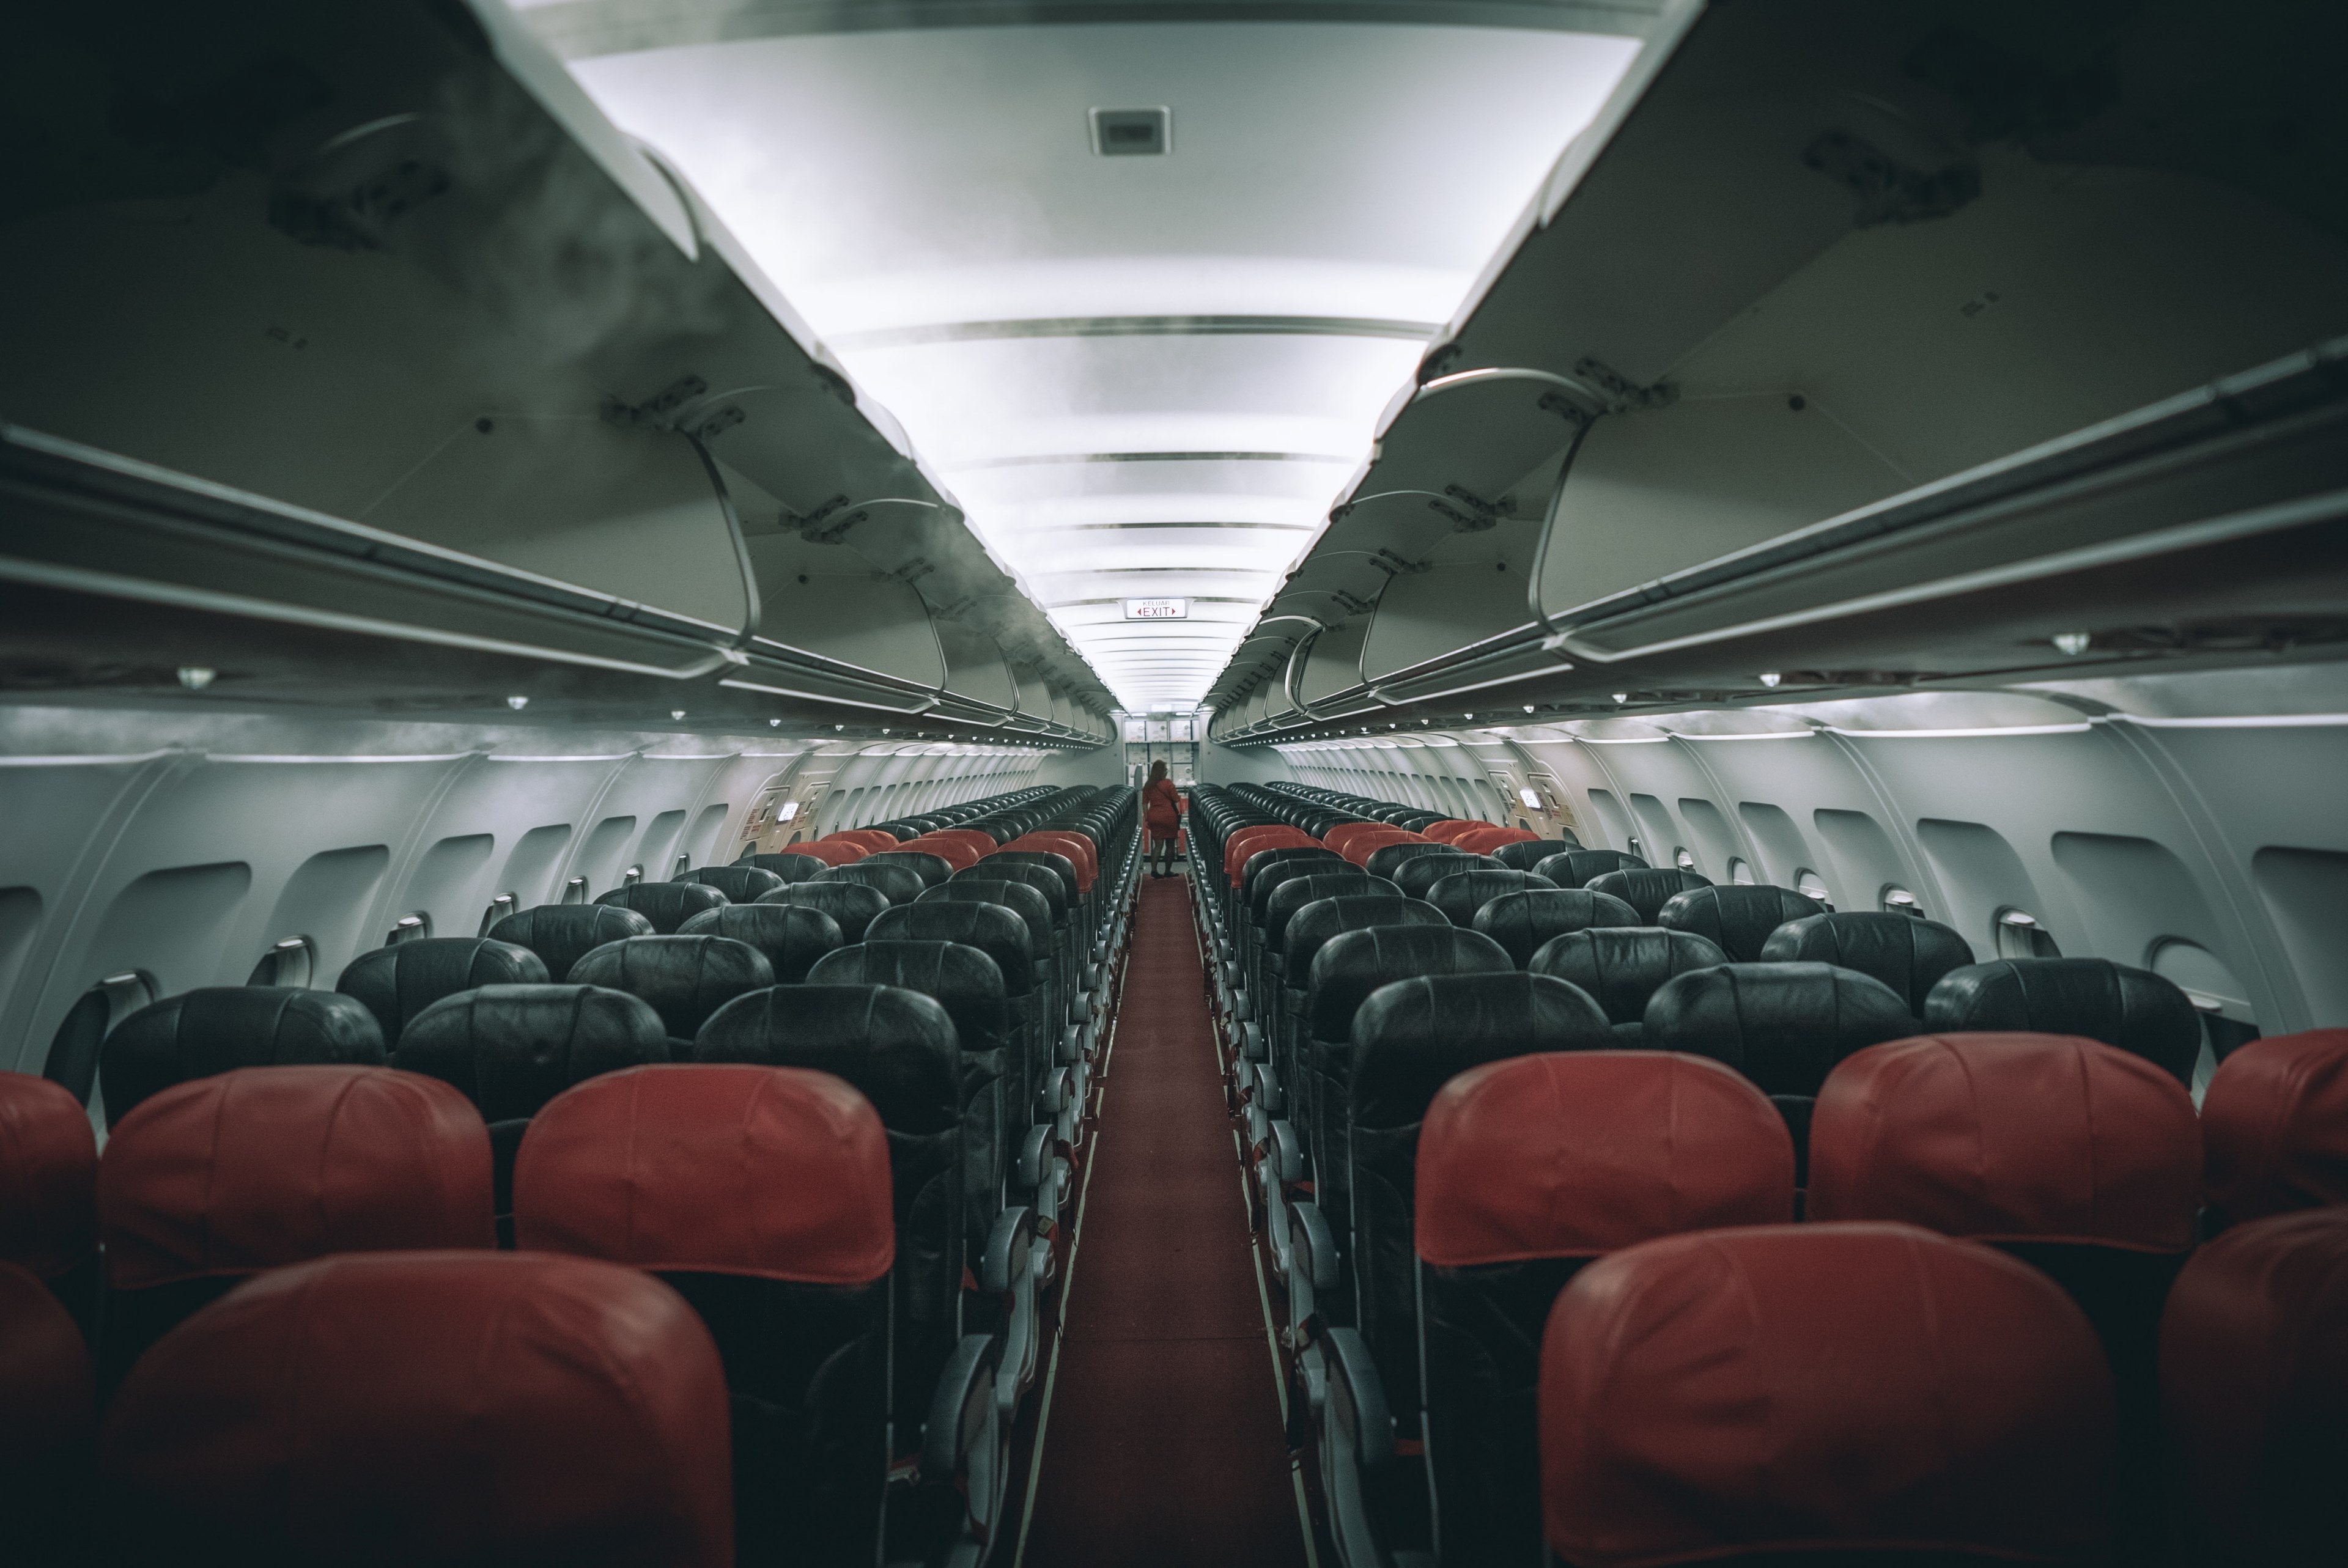 Wallpaper / seat empty airplane airplane aisle and airplane interior HD 4k wallpaper free download